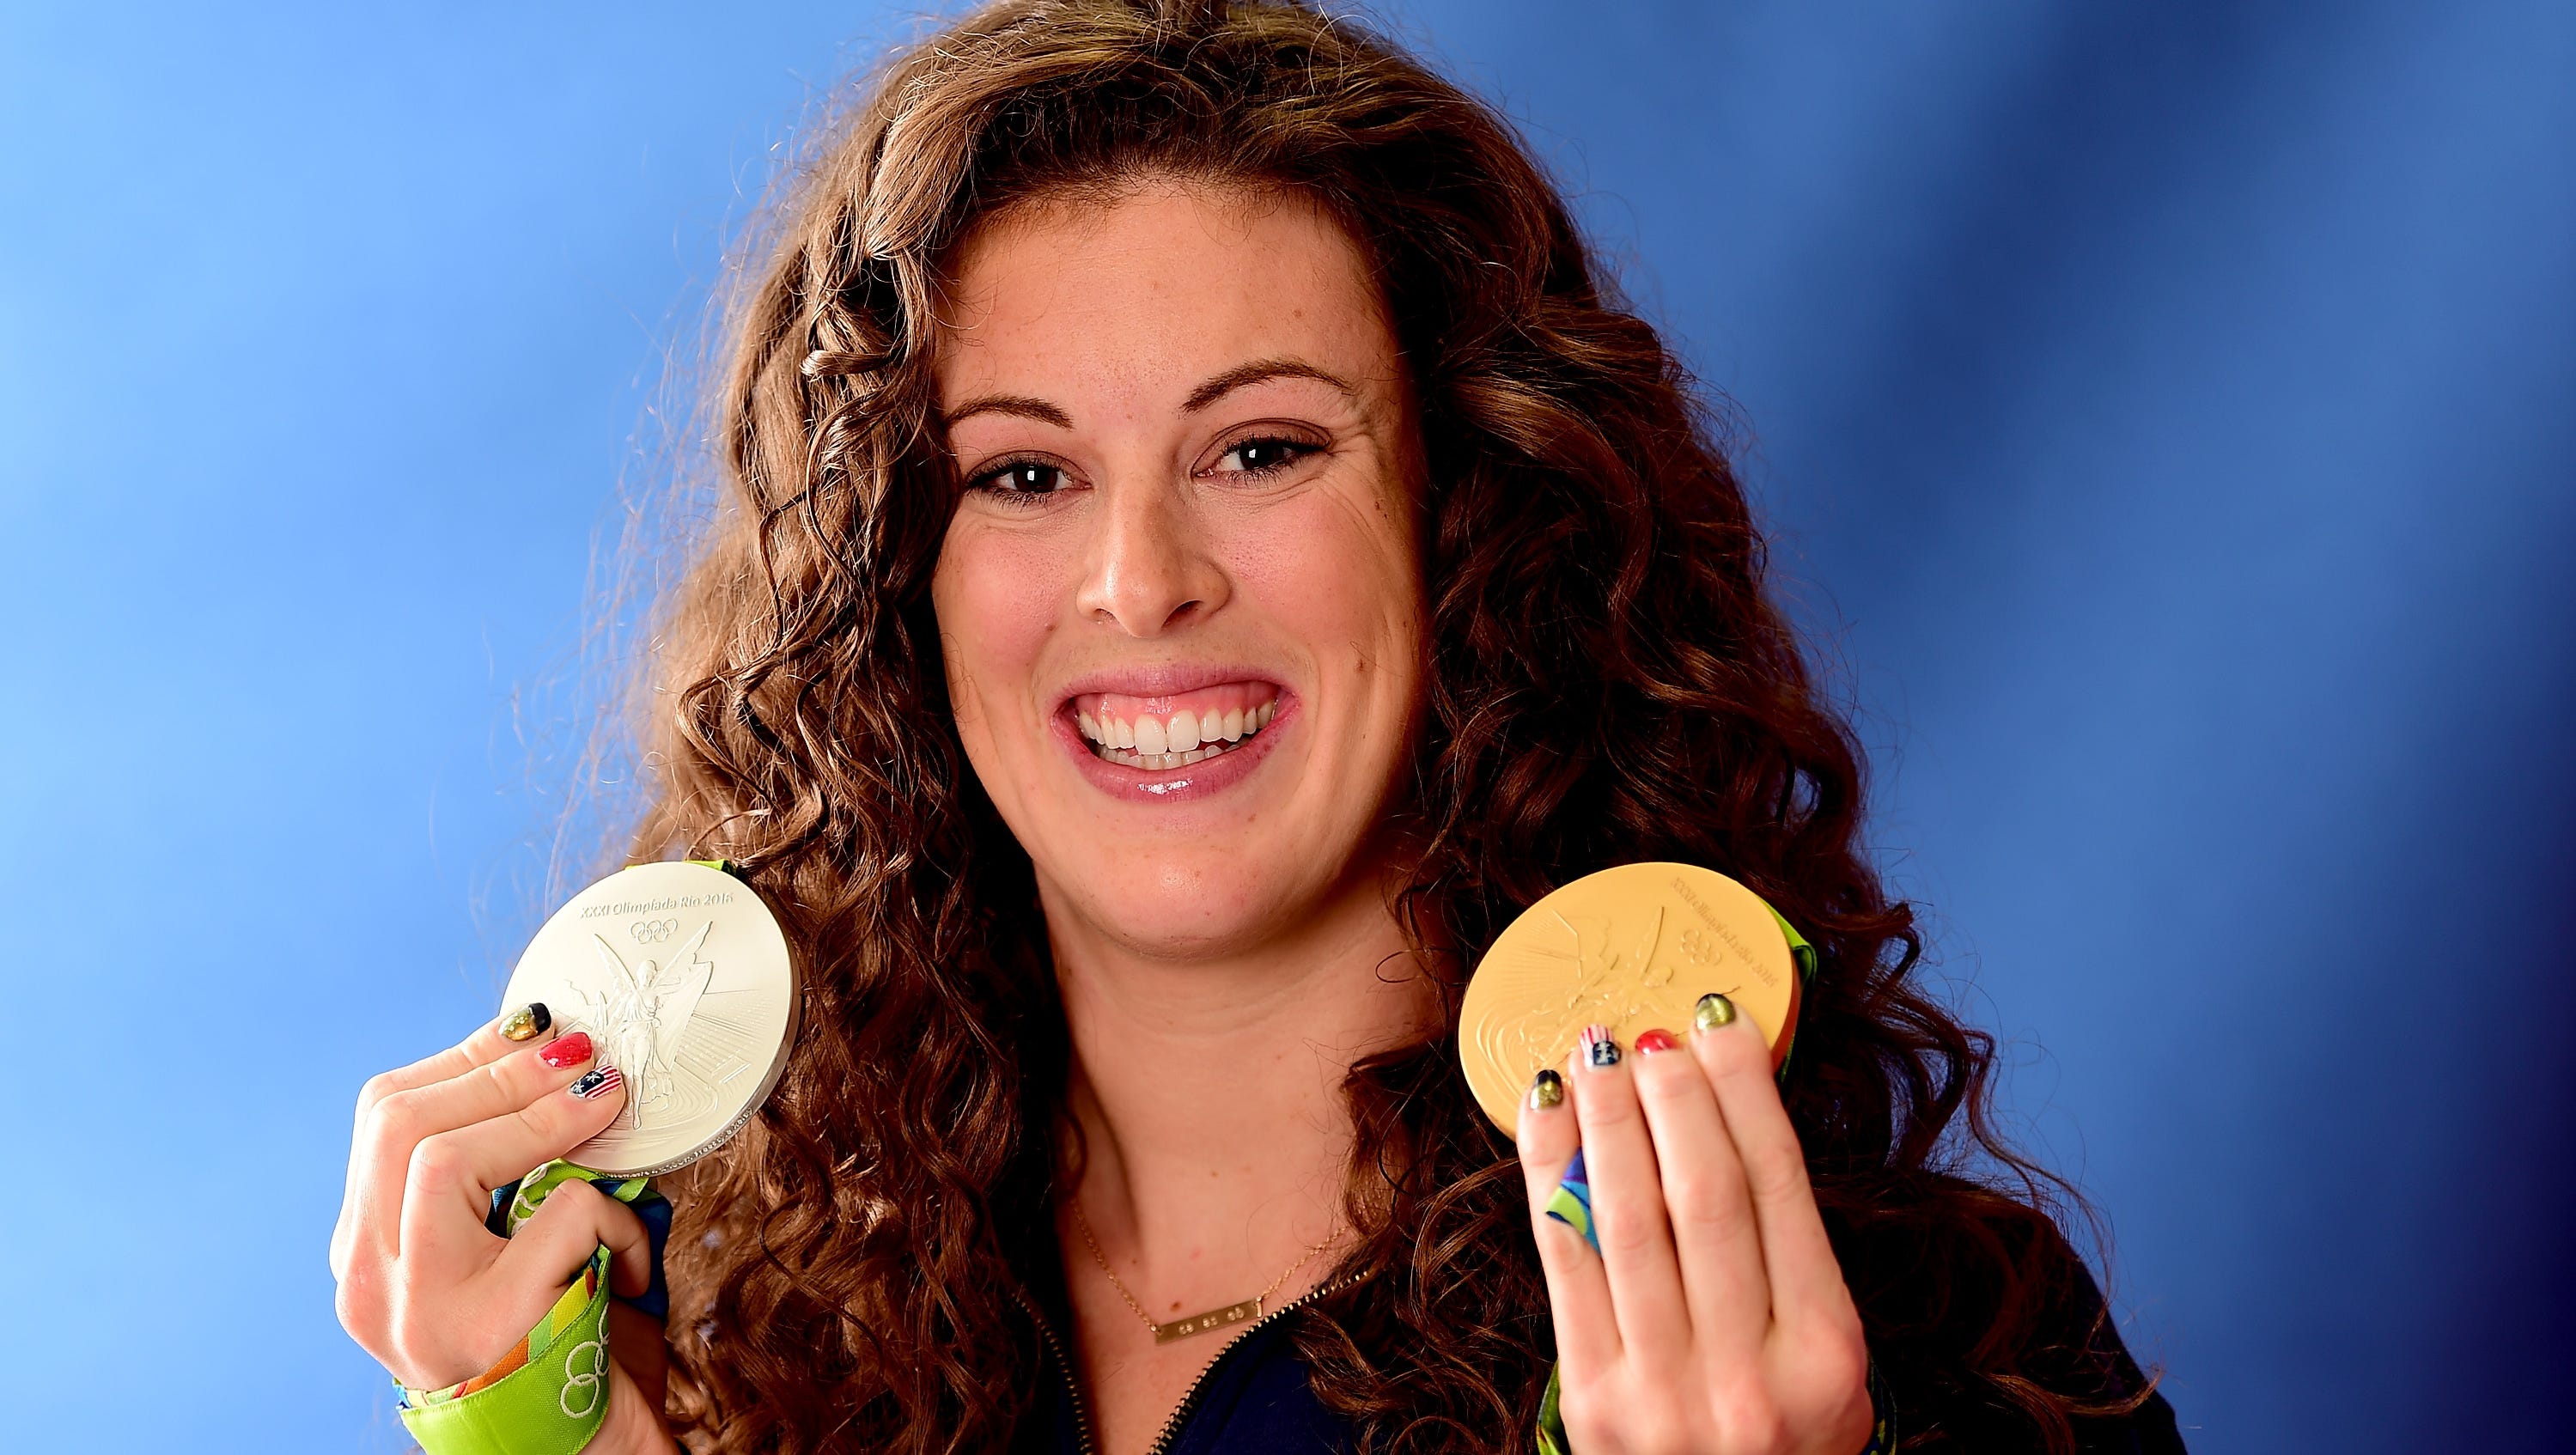 Olympic swimmer Allison Schmitt, a four-time Olympic gold medalist, has become a champion for mental-health advocacy. She plans to enroll in graduate school this winter to pursue a master's degree in psychology and continue her work to destigmatize mental illness.